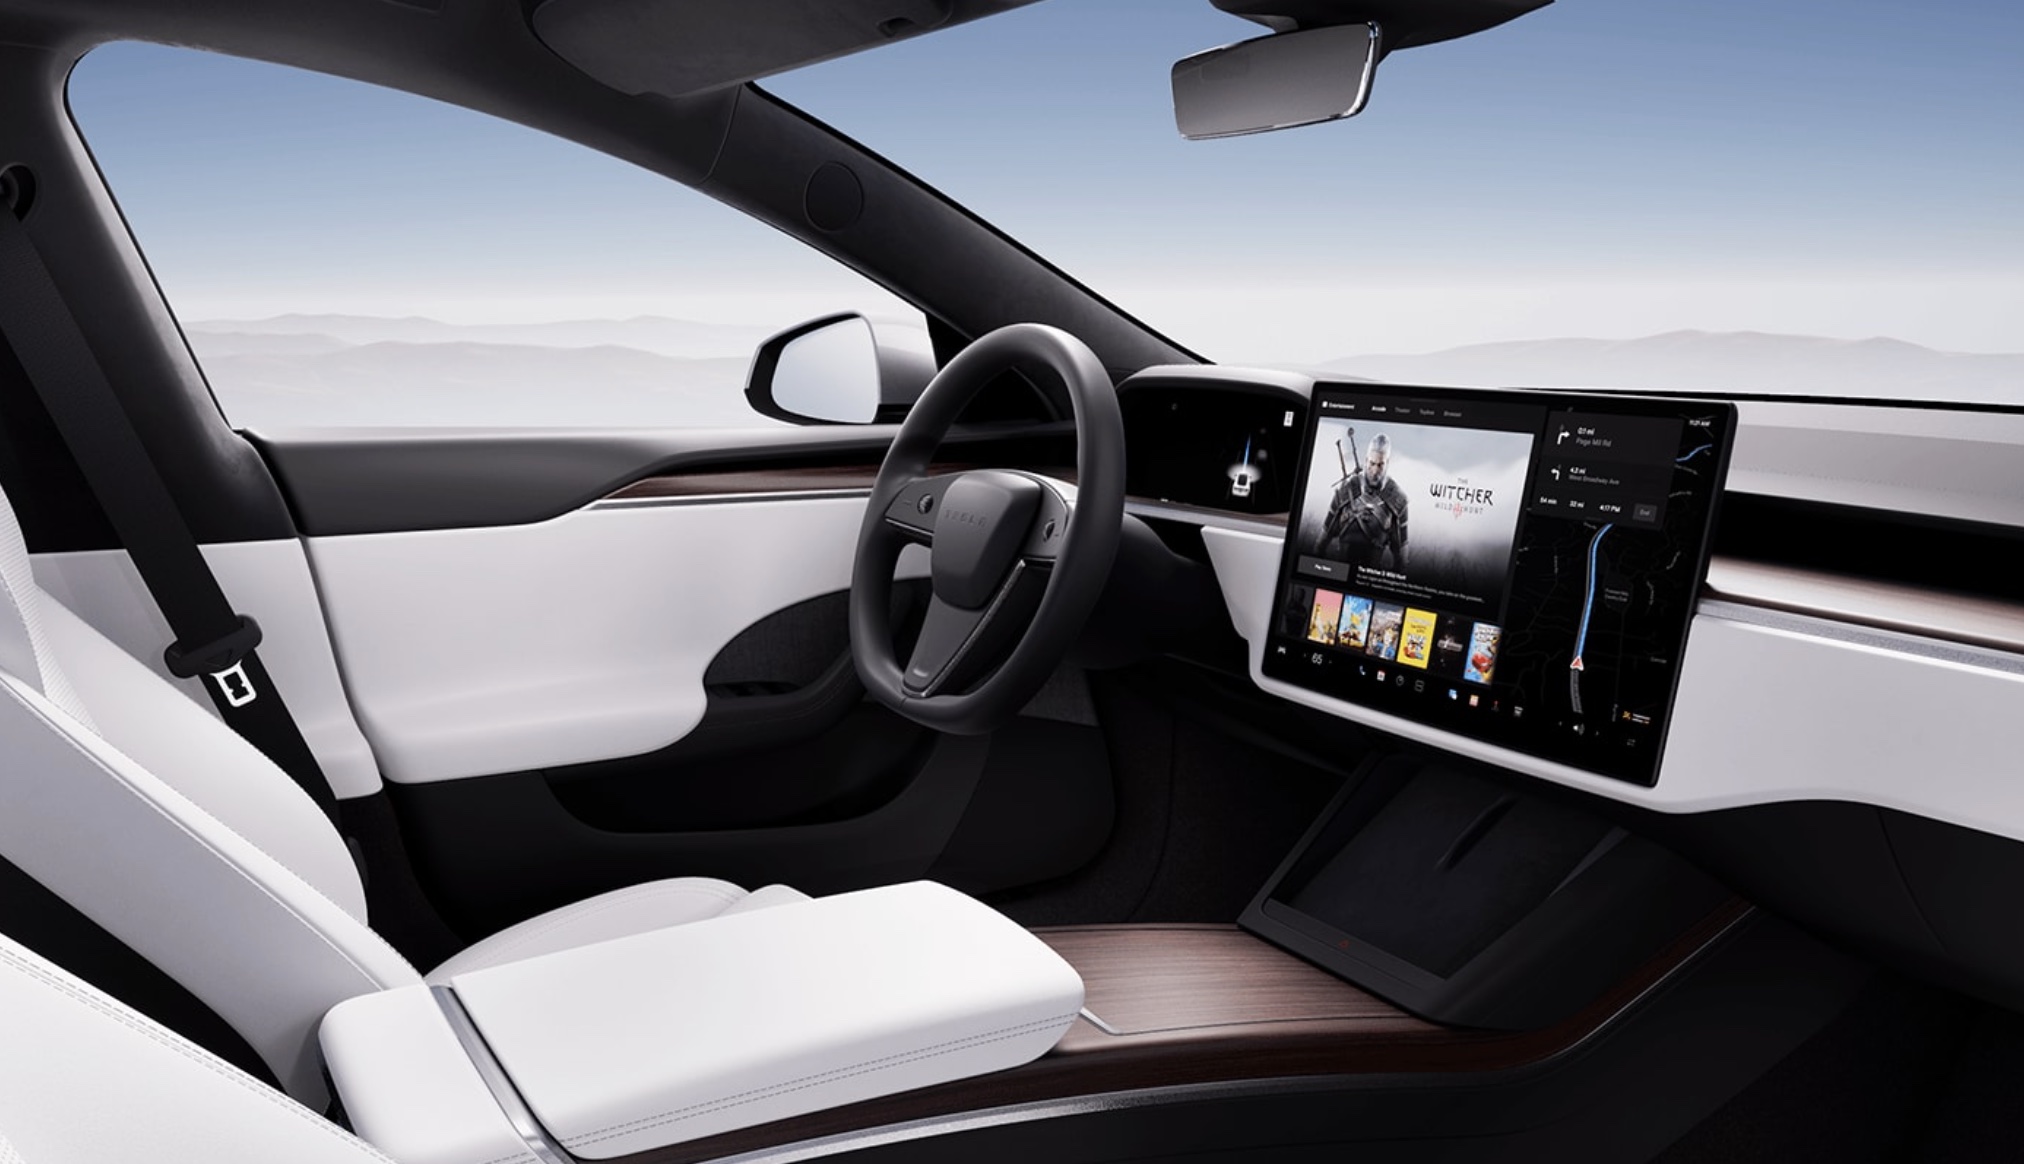 Tesla will bring back round steering wheel instead of handwheel in Model S and Model X for $700 surcharge